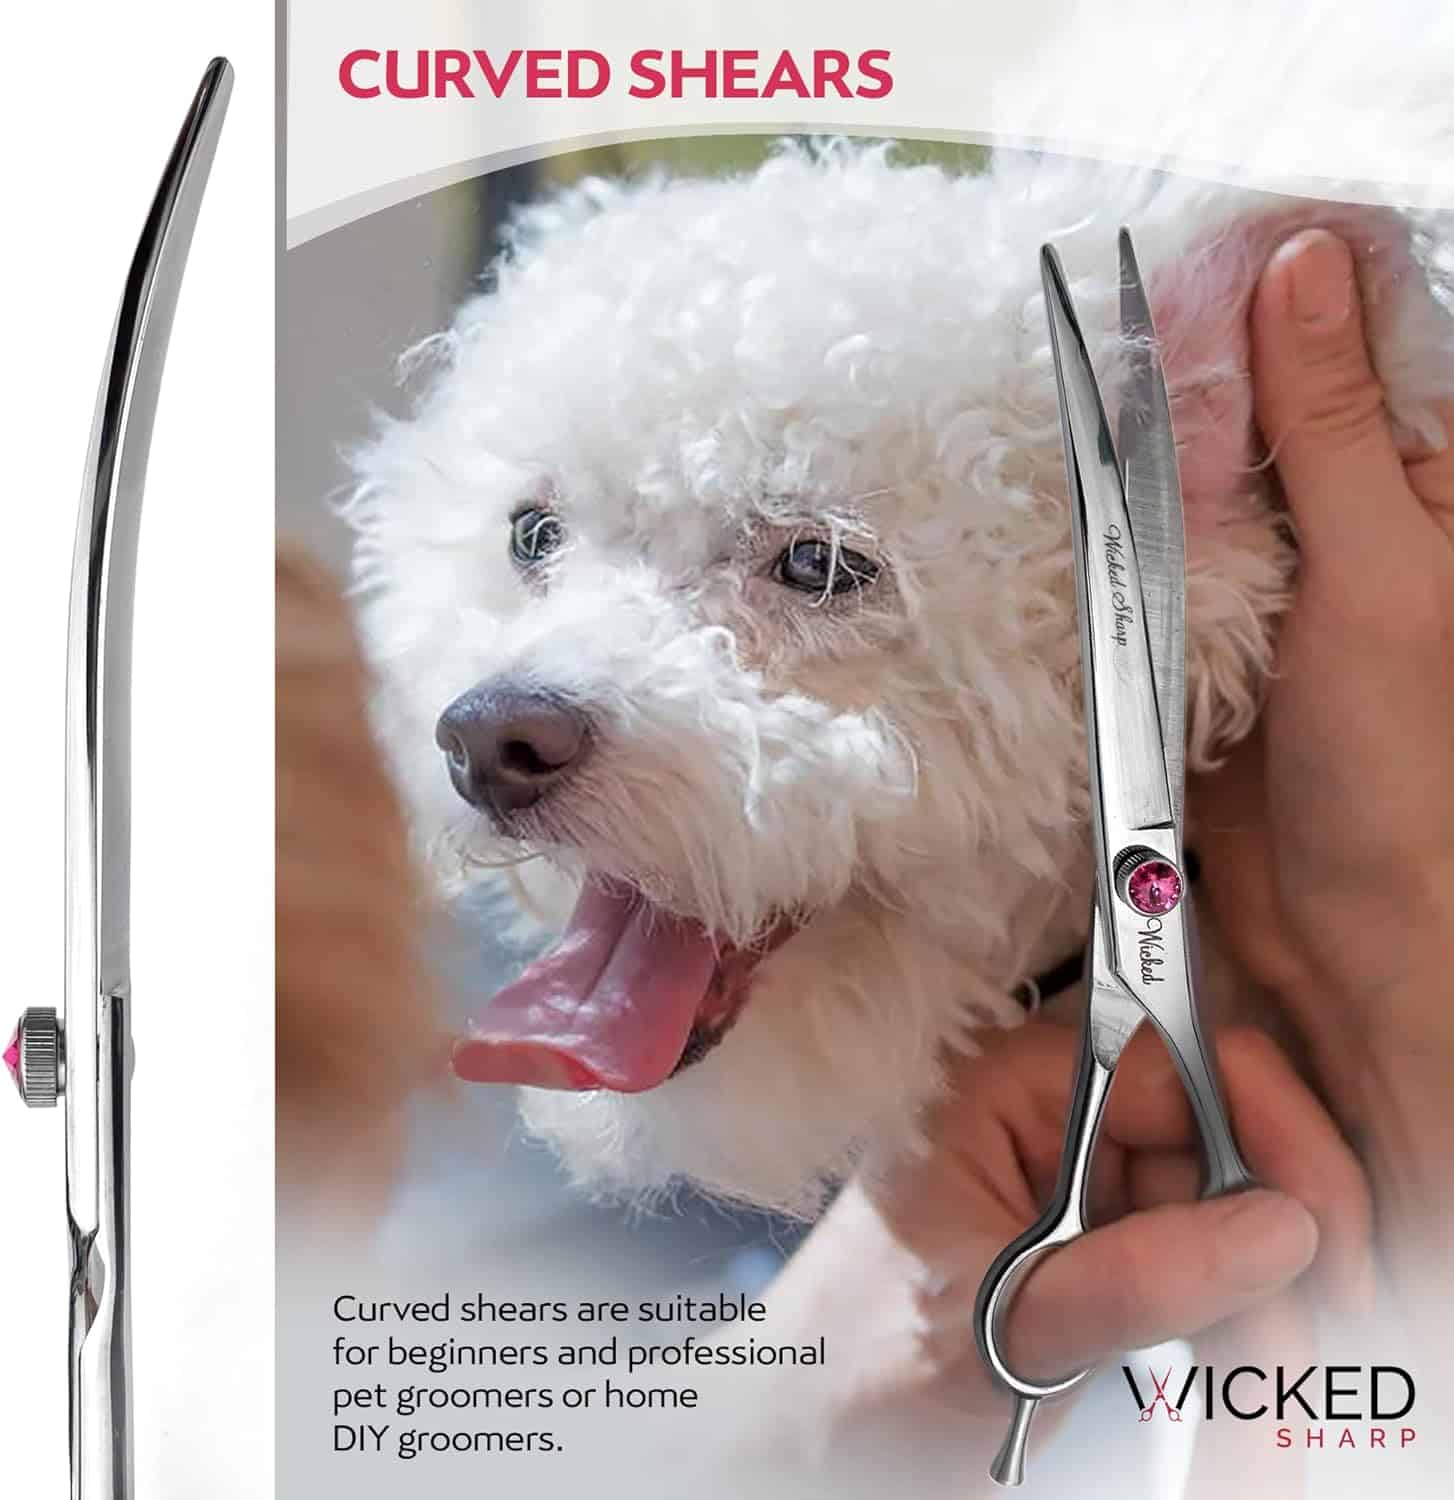 Wicked Sharp Professional Dog Scissors: A Remarkable Grooming Kit That Redefines Precision and Comfort